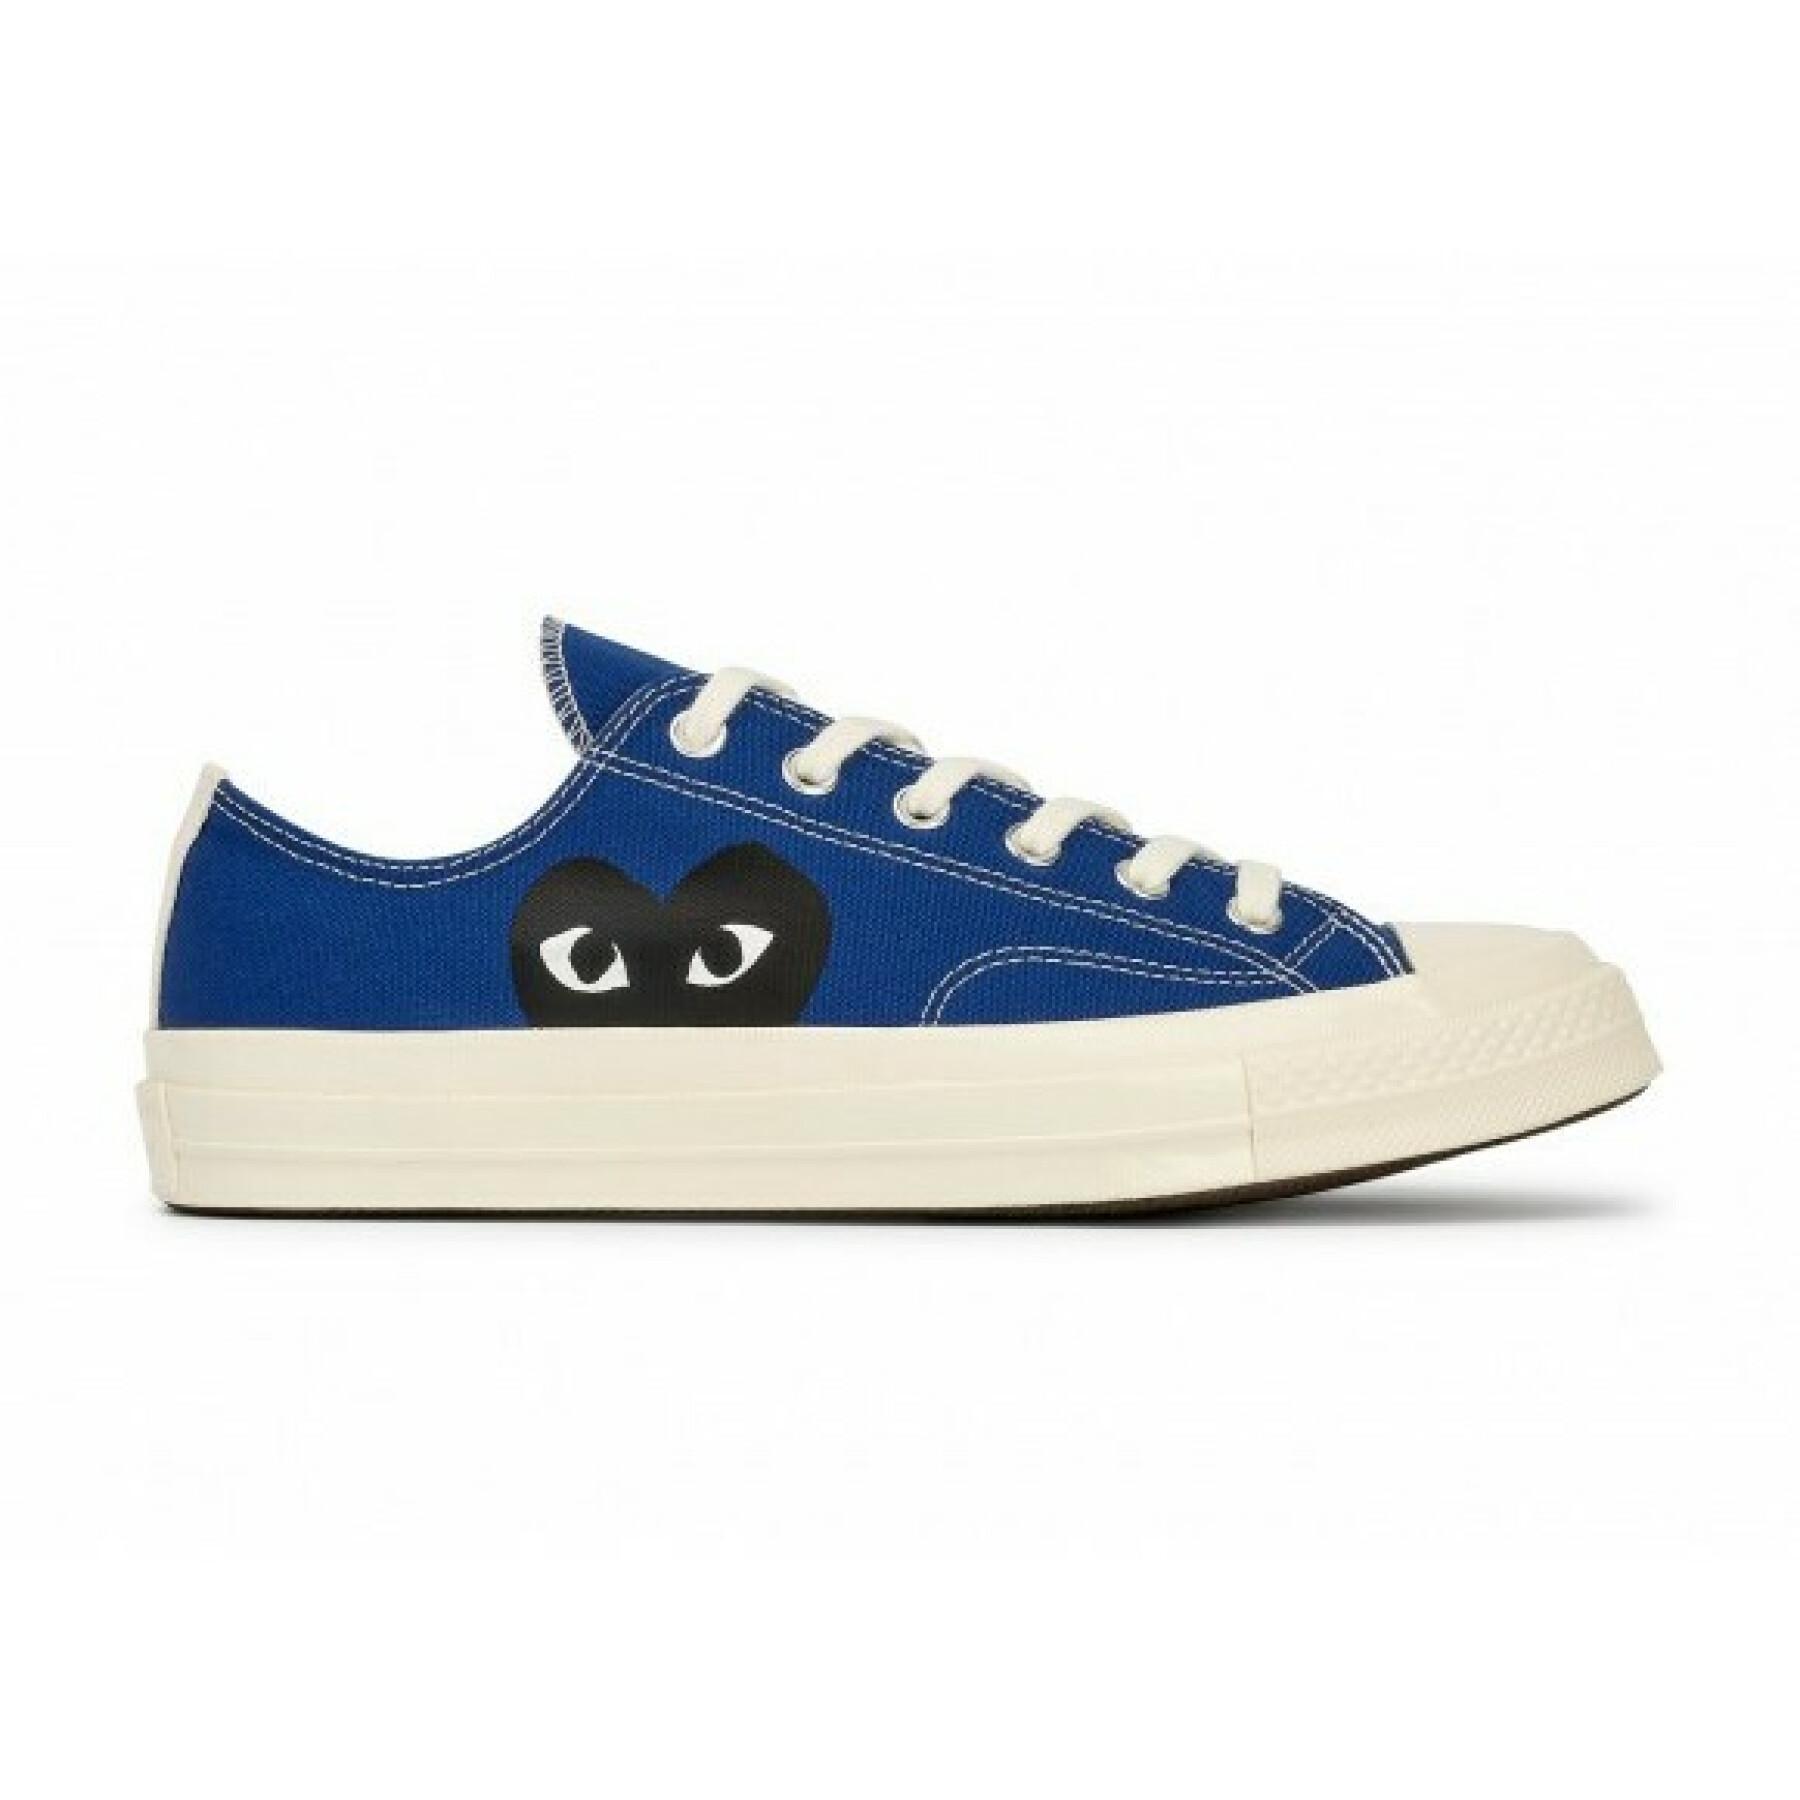 Trainers Converse x Comme des garçons Chuck Taylor All-Star 70s Ox Play